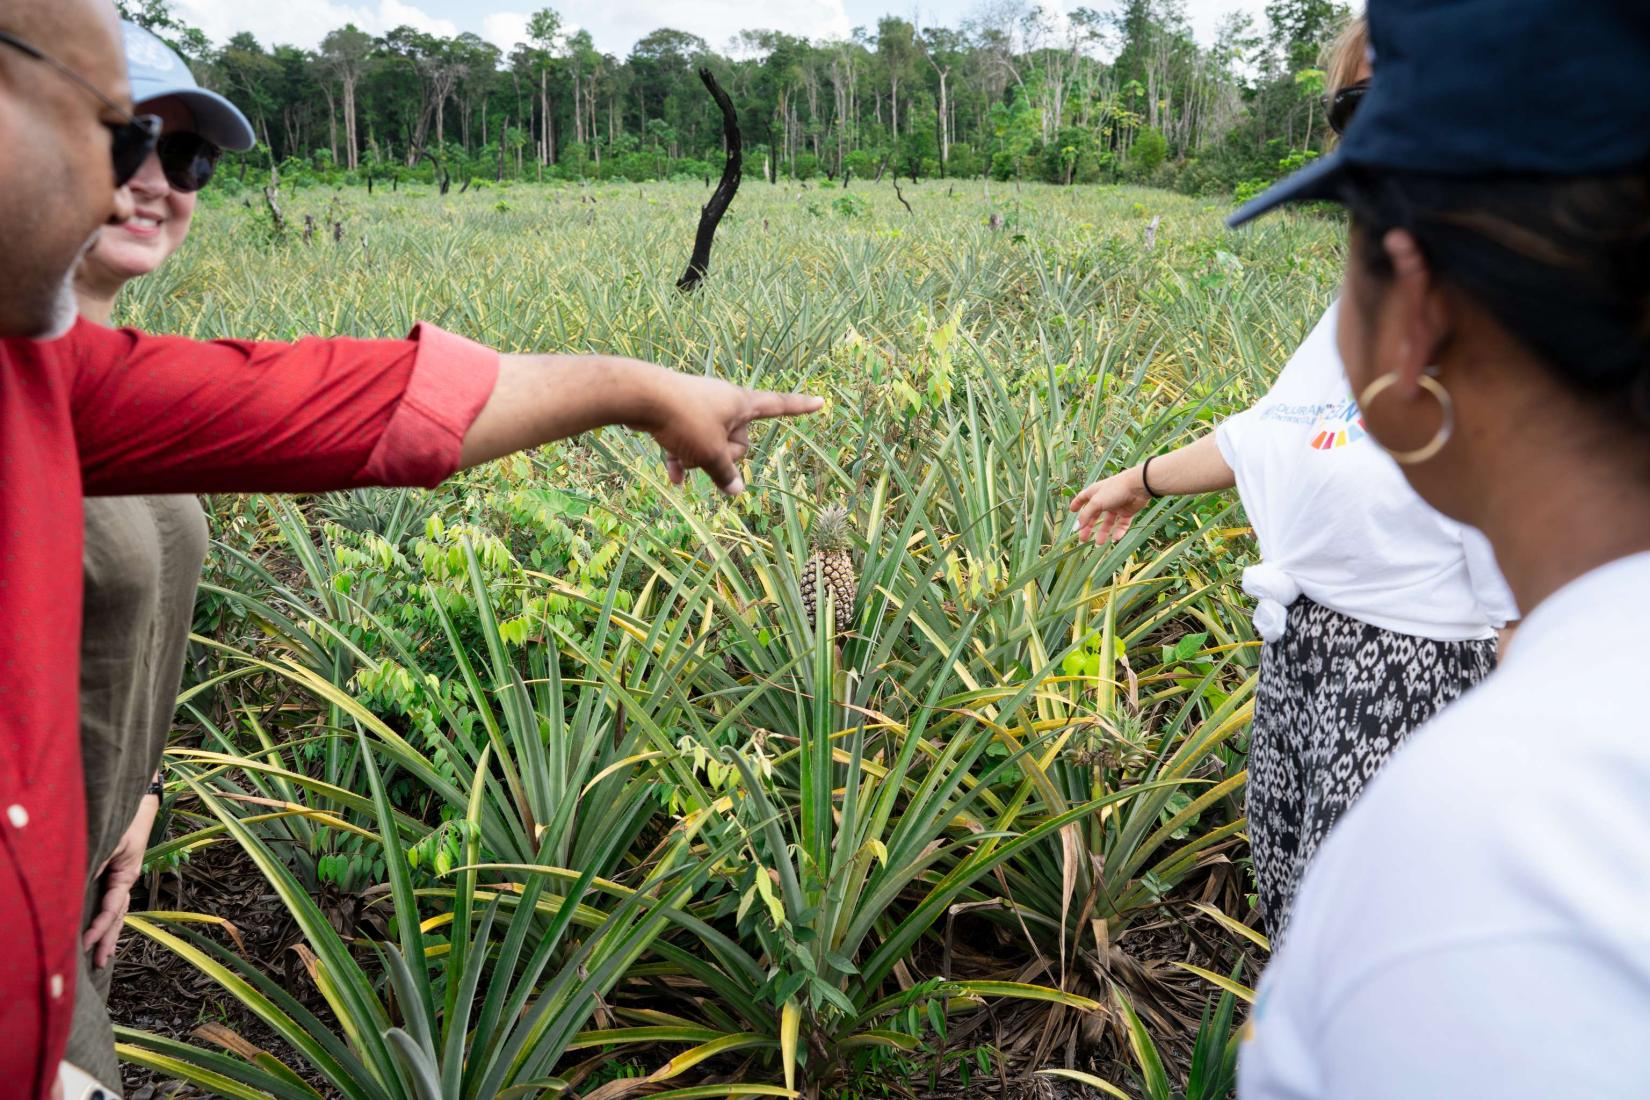 A group of people point at pineapples in a pineapple farm.